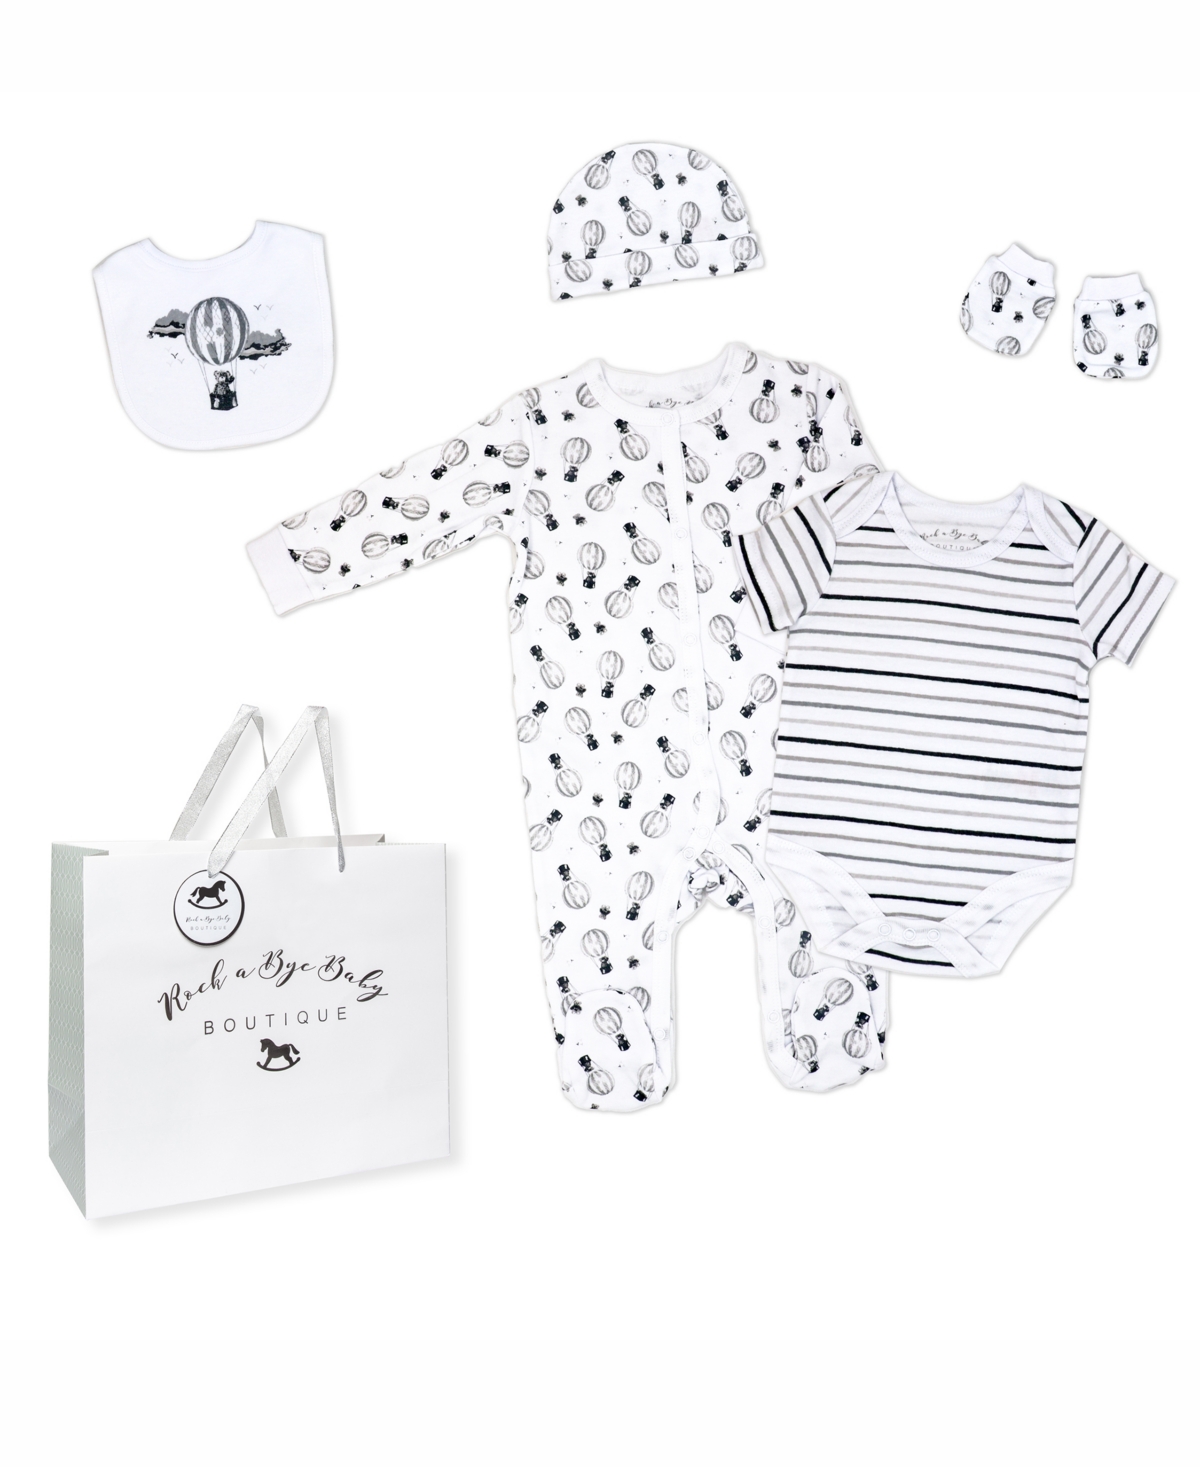 Rock-a-bye Baby Boutique Baby Boys Or Baby Girls Layette Gift Bag Set In Hot Air Balloons